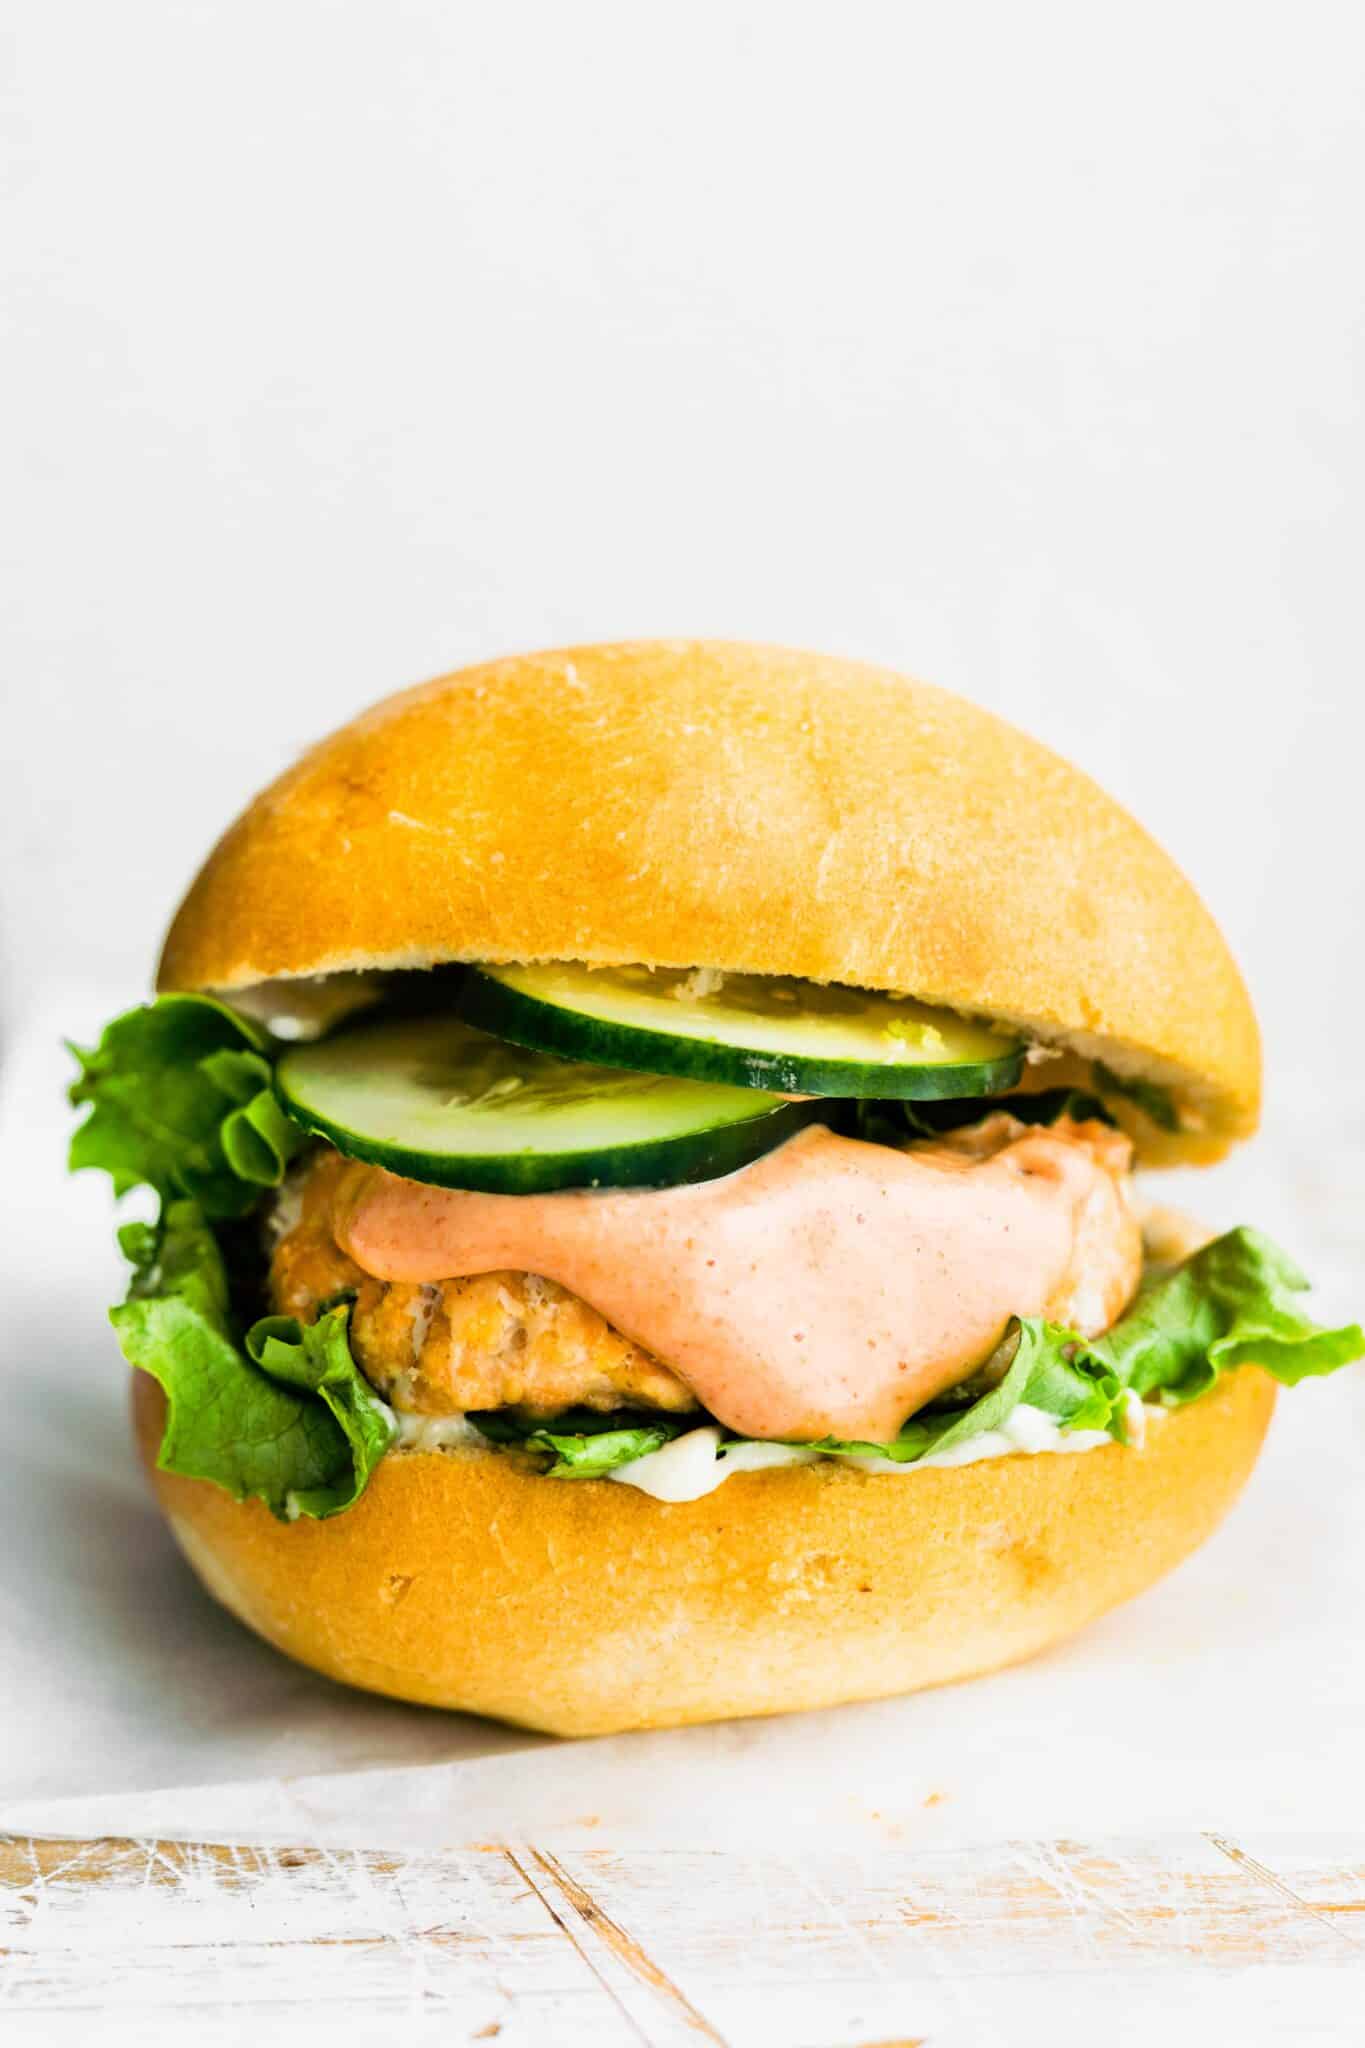 A salmon burger with chipotle mayo, and fresh veggies on a gluten free bun.